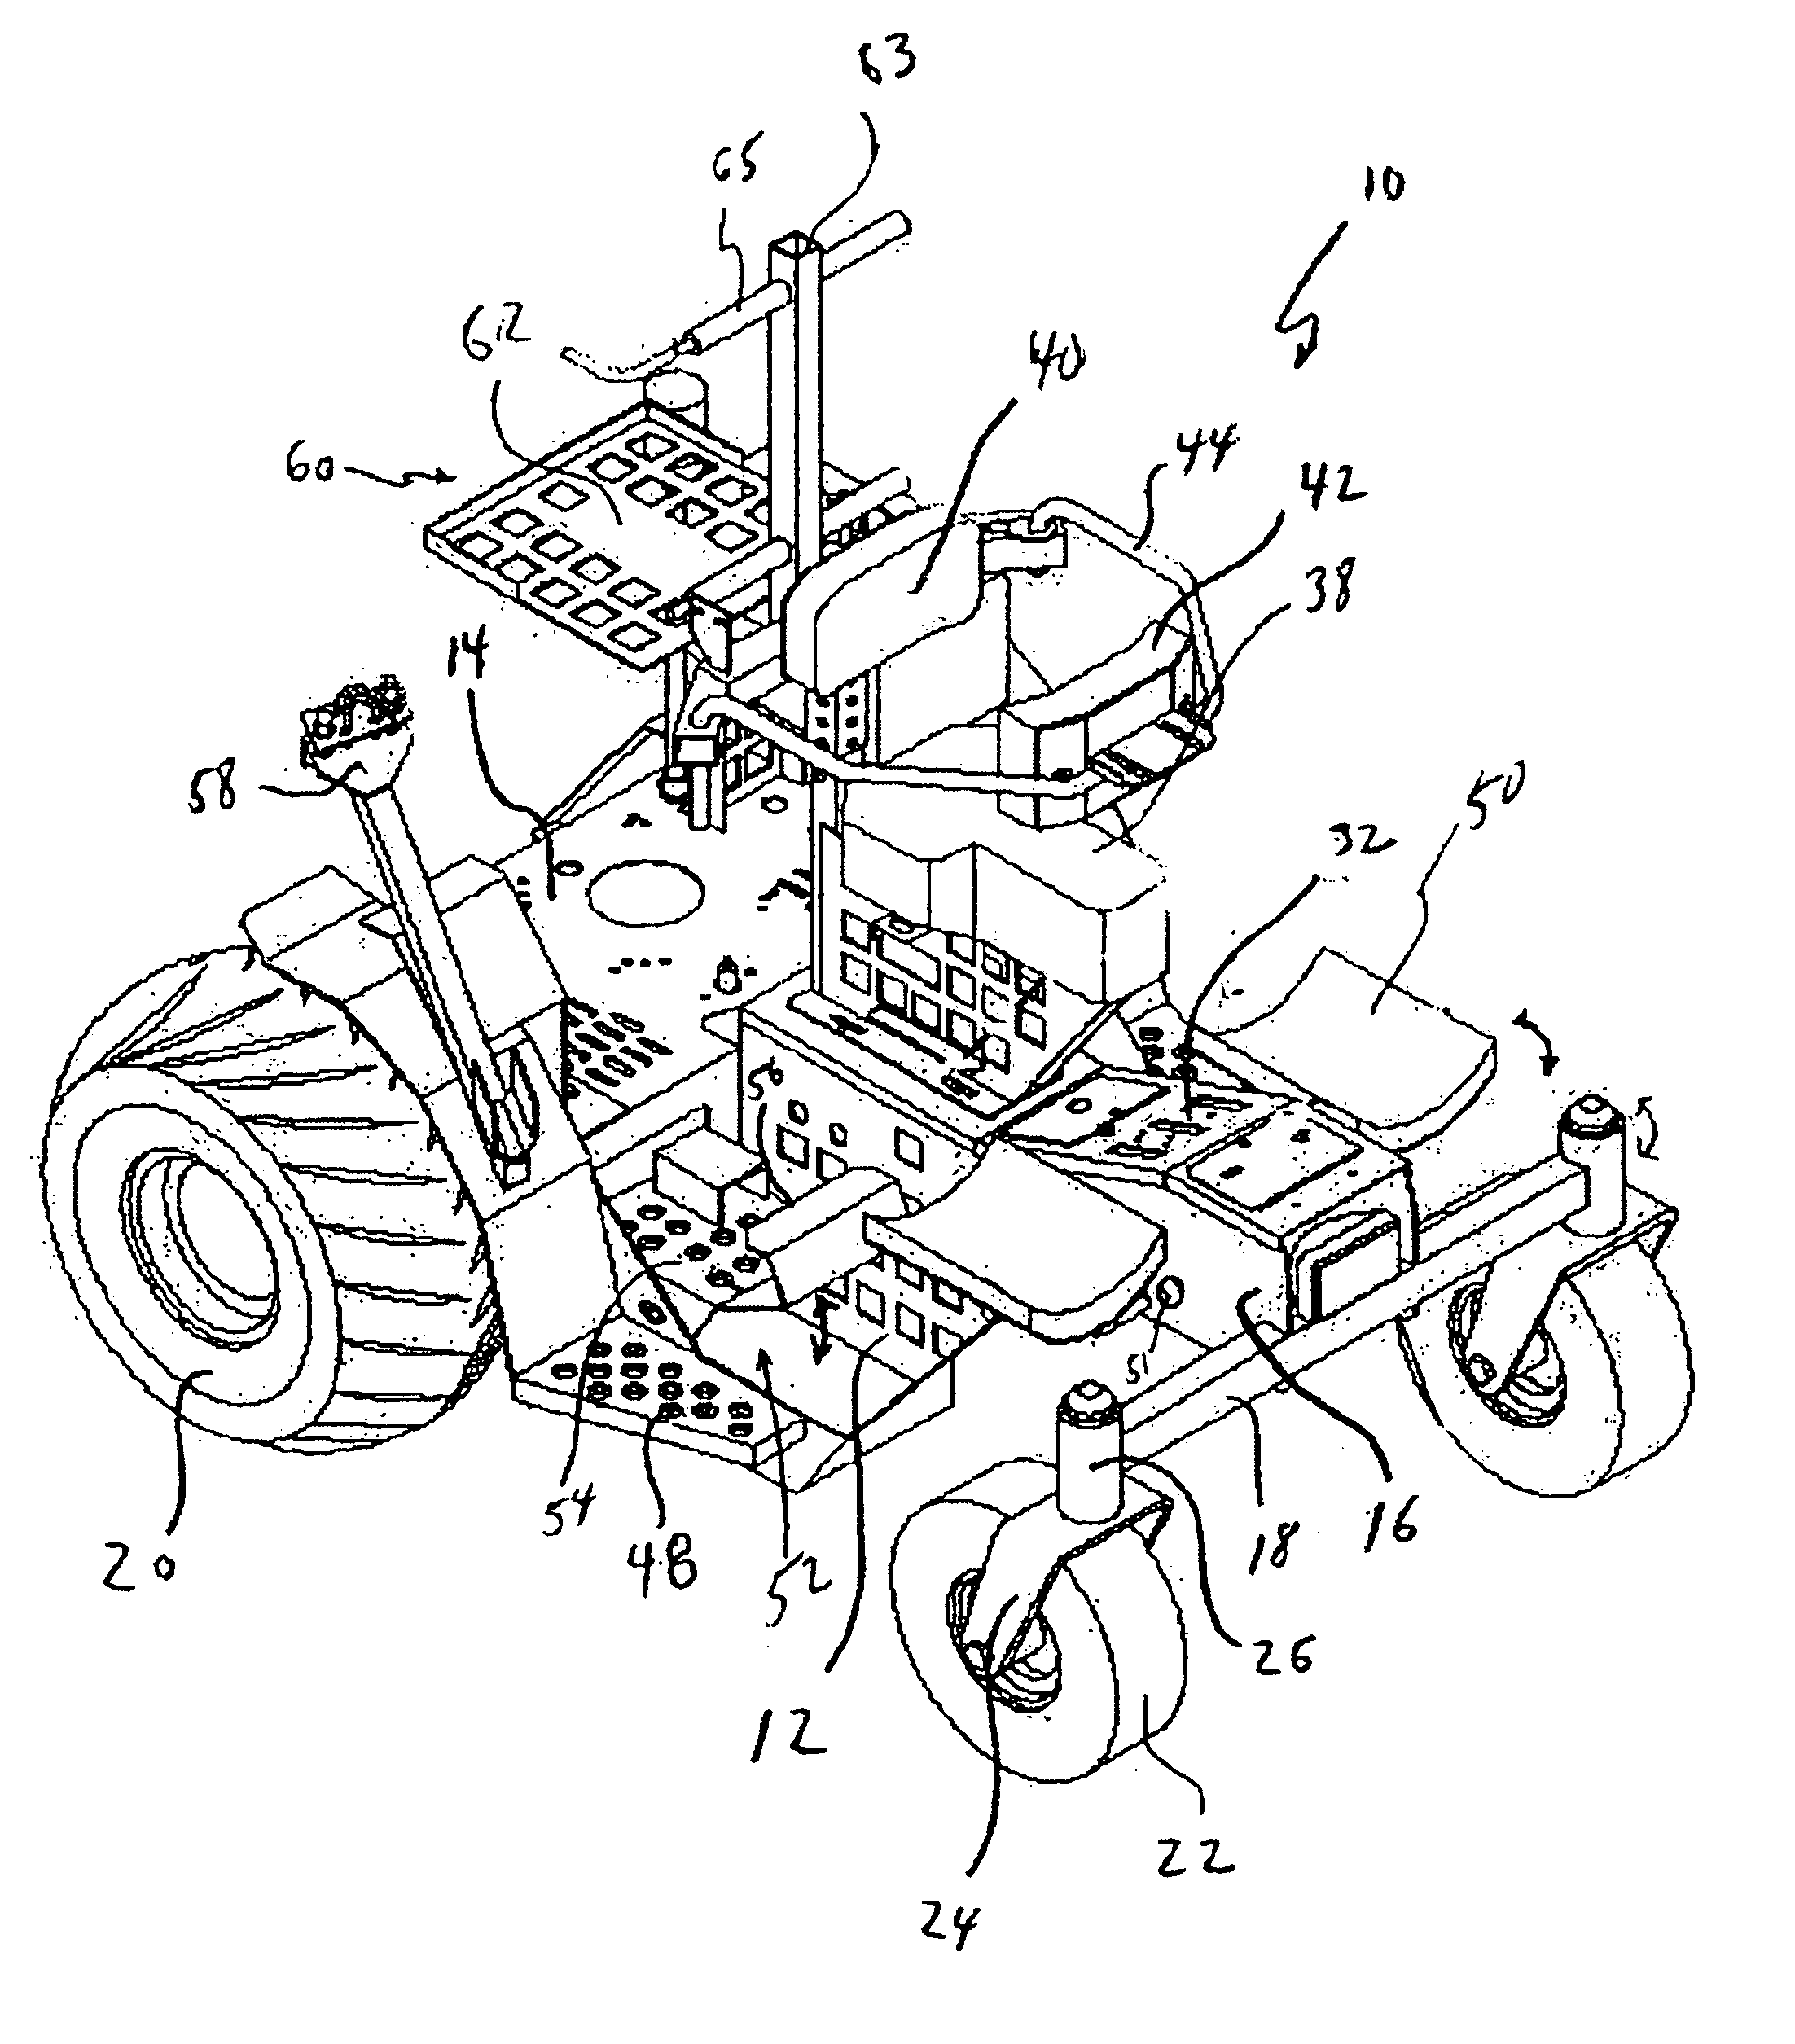 Utility vehicle with foot-controlled mobility